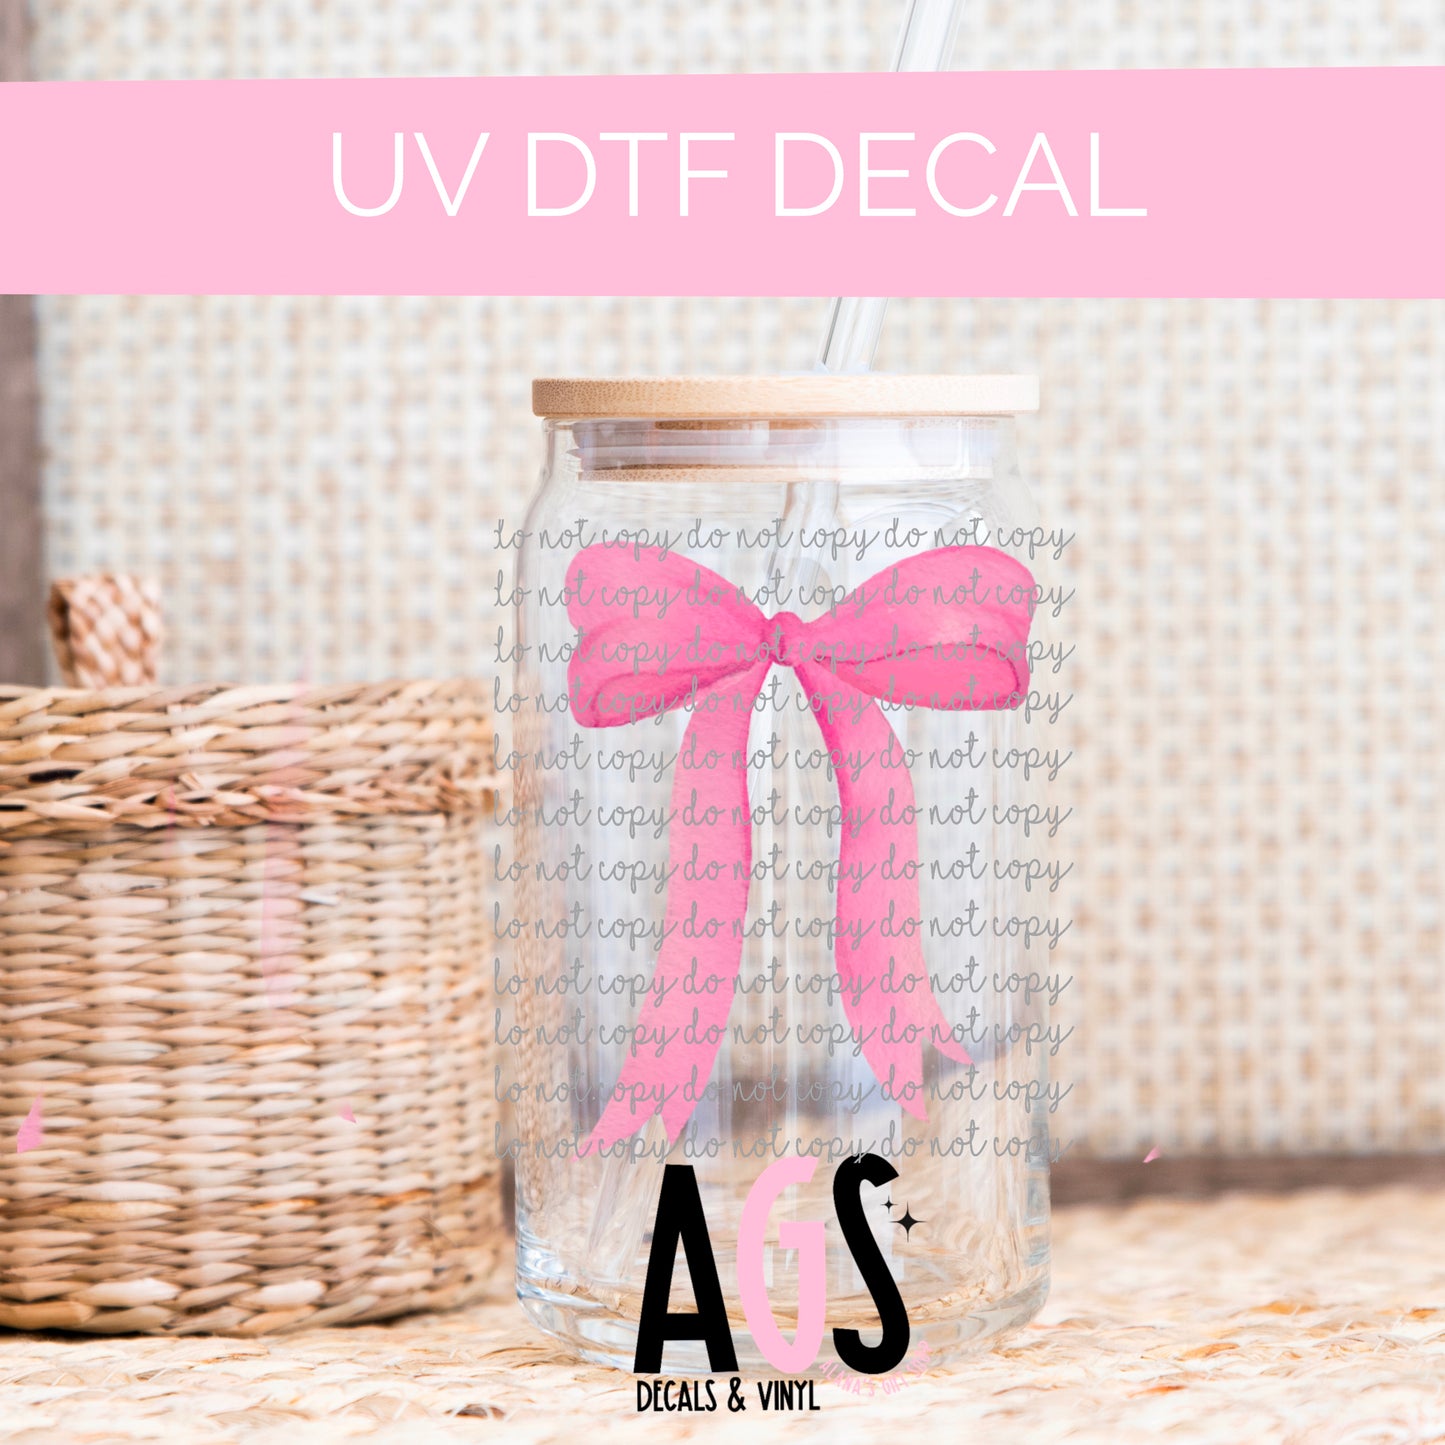 UV DTF DECAL-051 Pink Bow